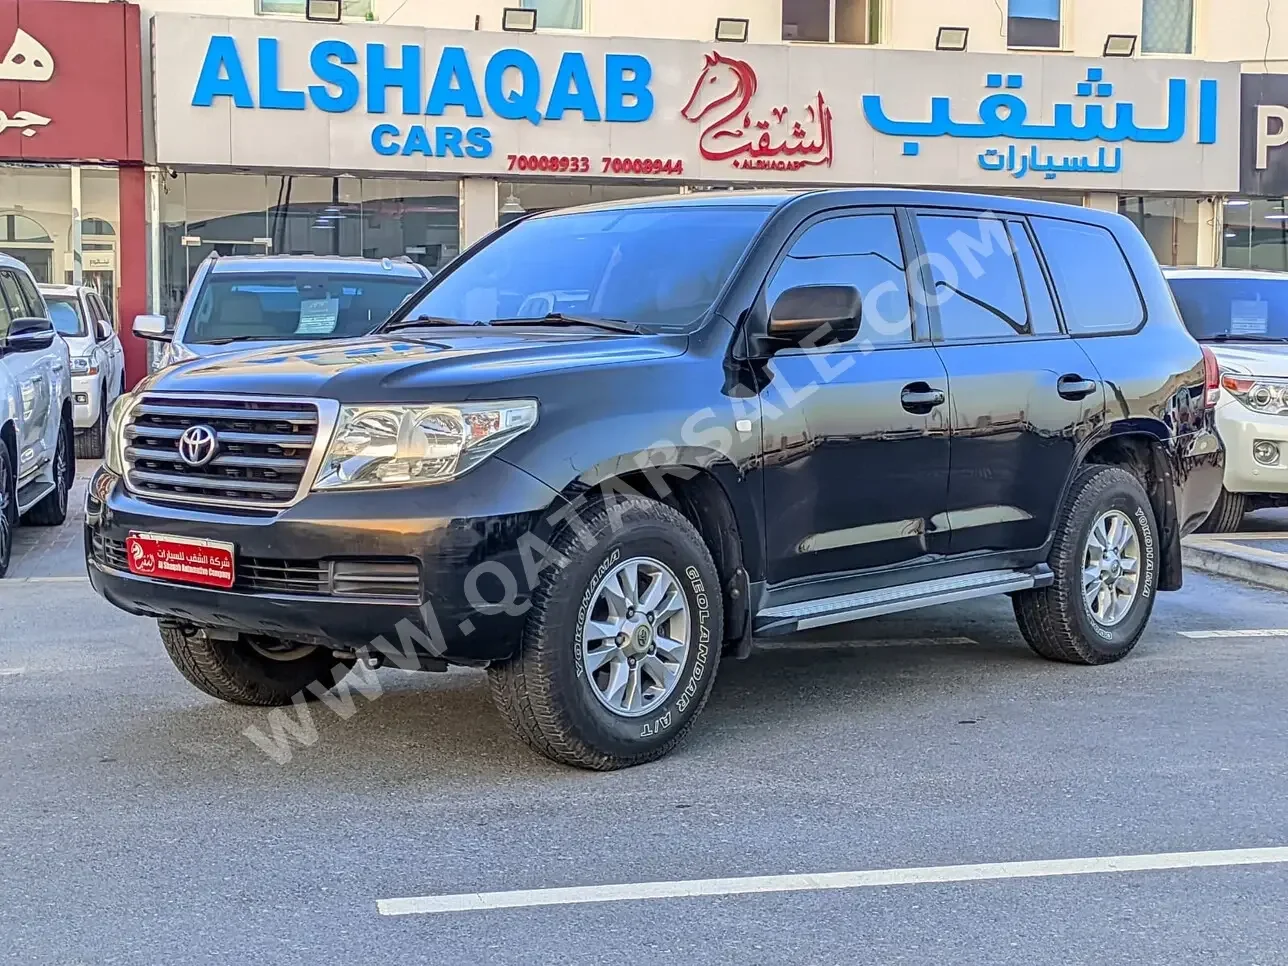 Toyota  Land Cruiser  G  2011  Automatic  420,000 Km  6 Cylinder  Four Wheel Drive (4WD)  SUV  Gray